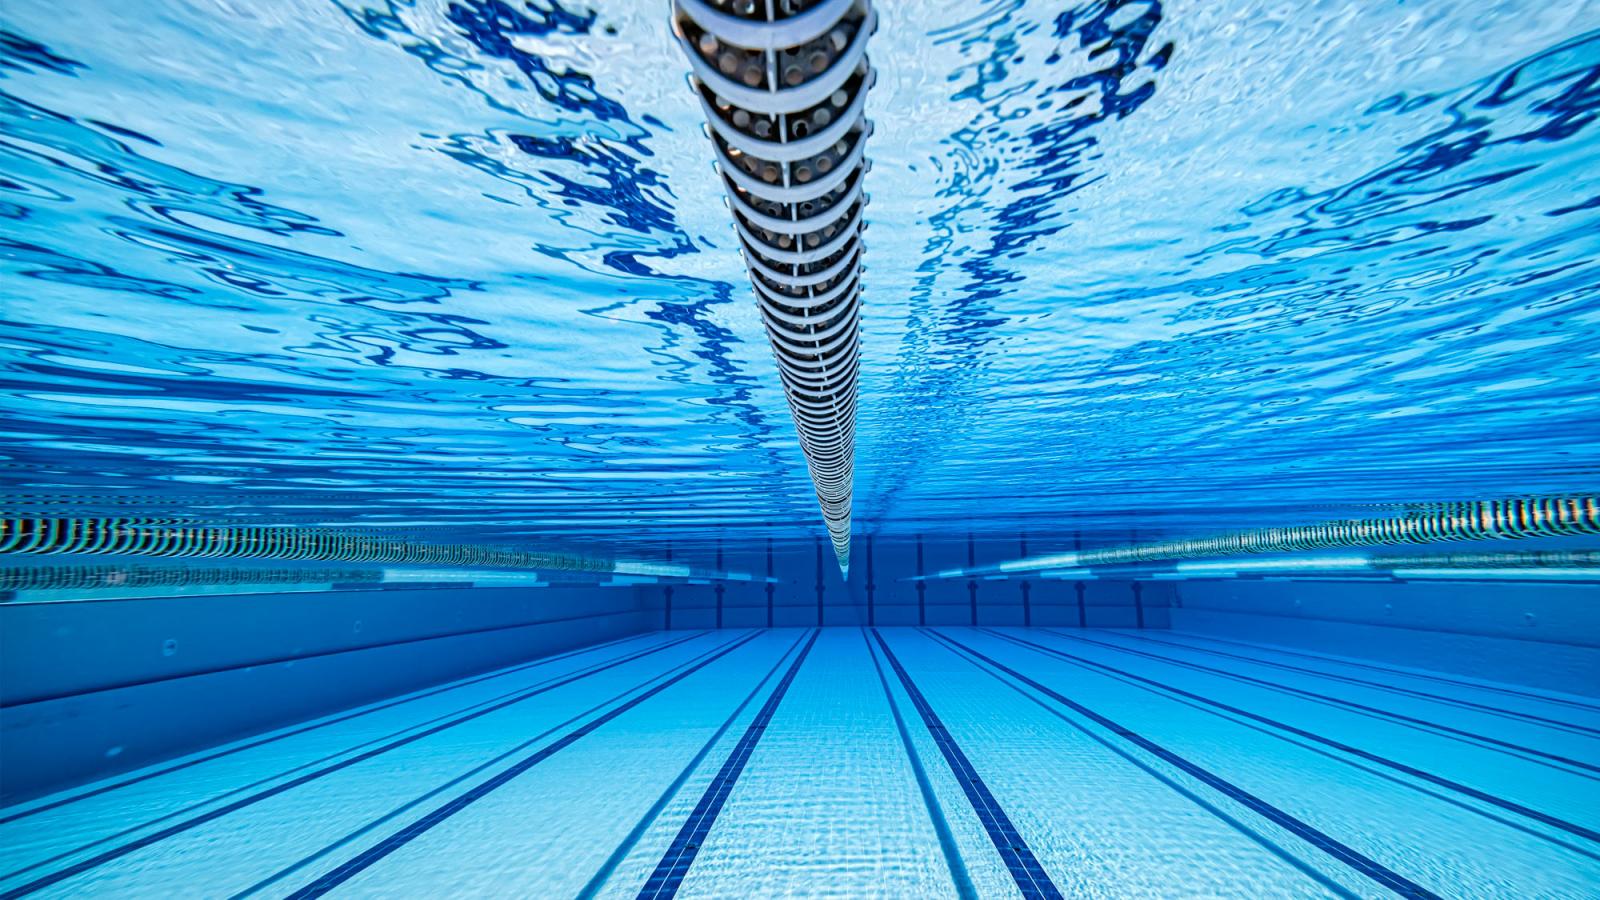 View of a pool from under the water.